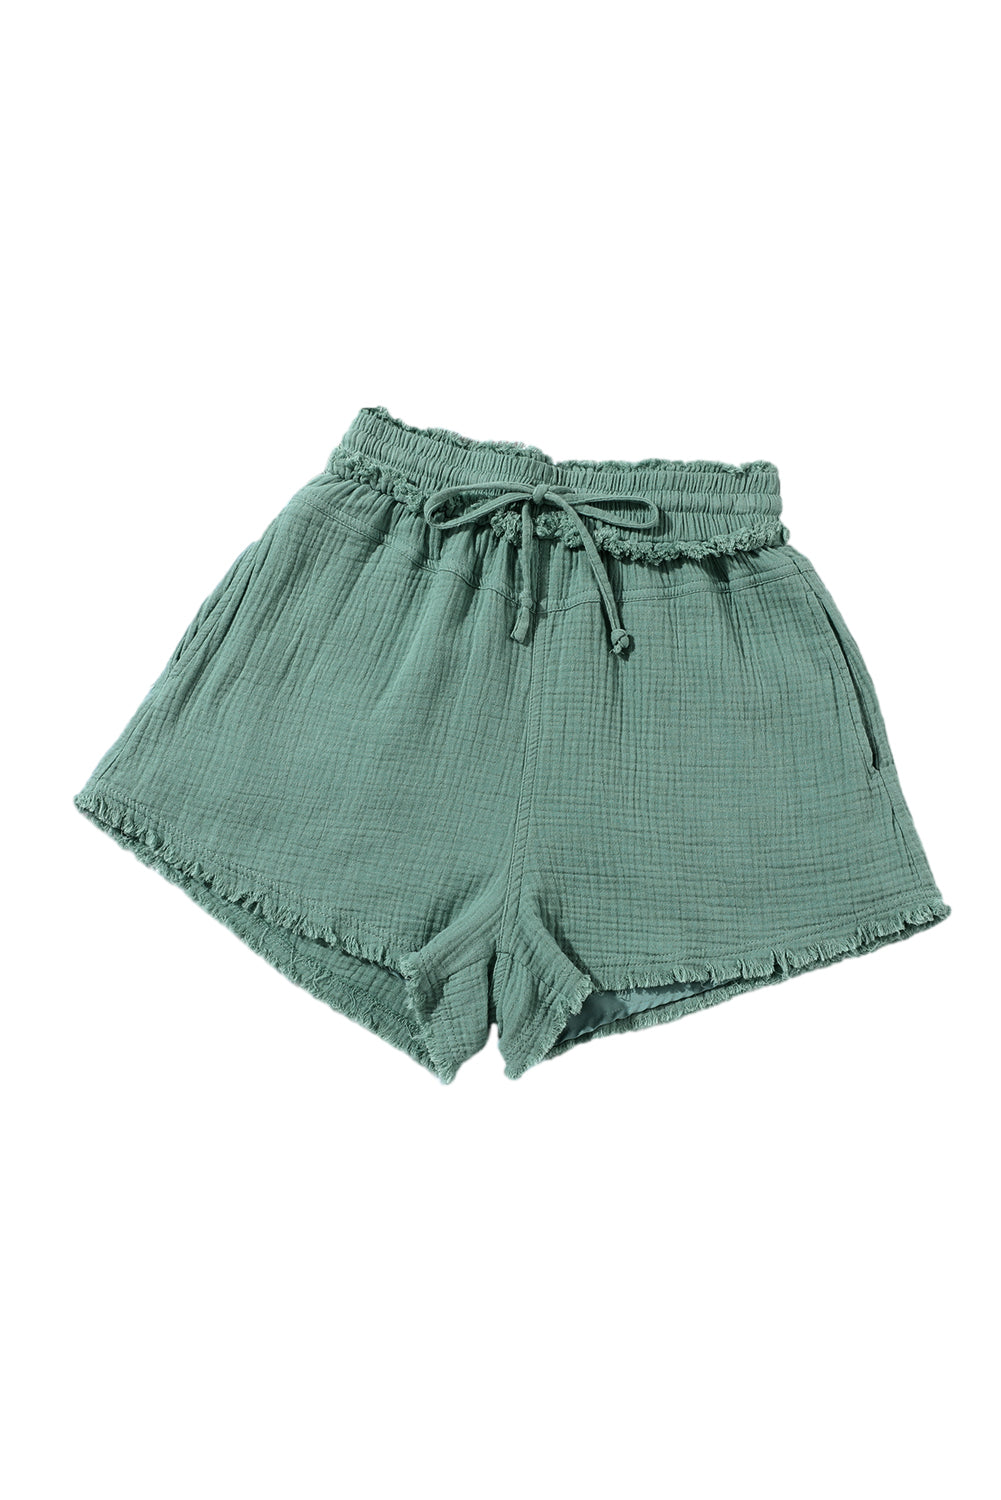 Night Shore Crinkled 100% Cotton Womens Shorts